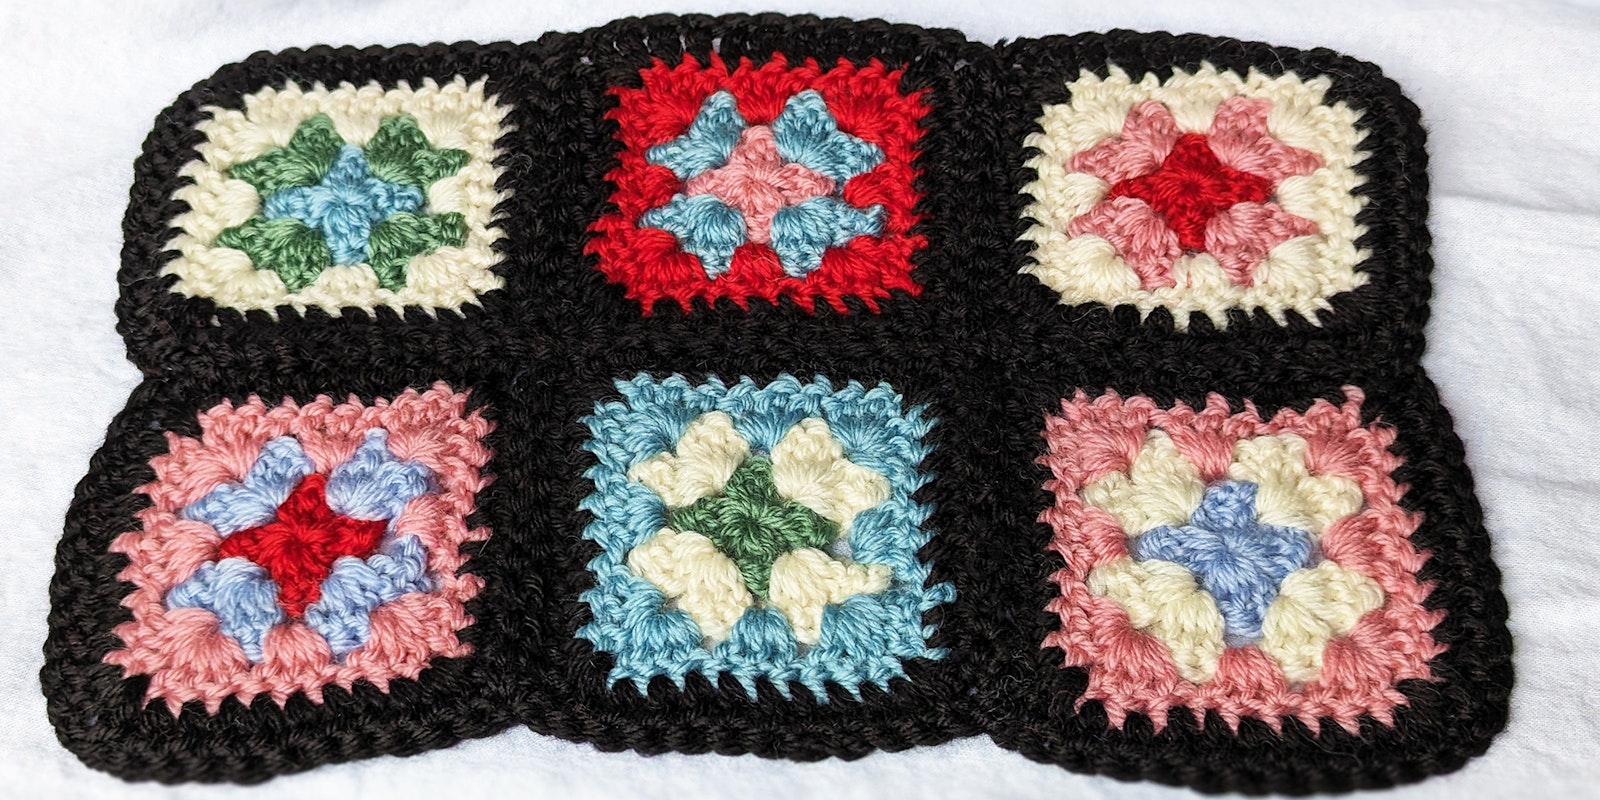 The First Granny Square: Translating the 1880s' Crazy-Quilt Trend